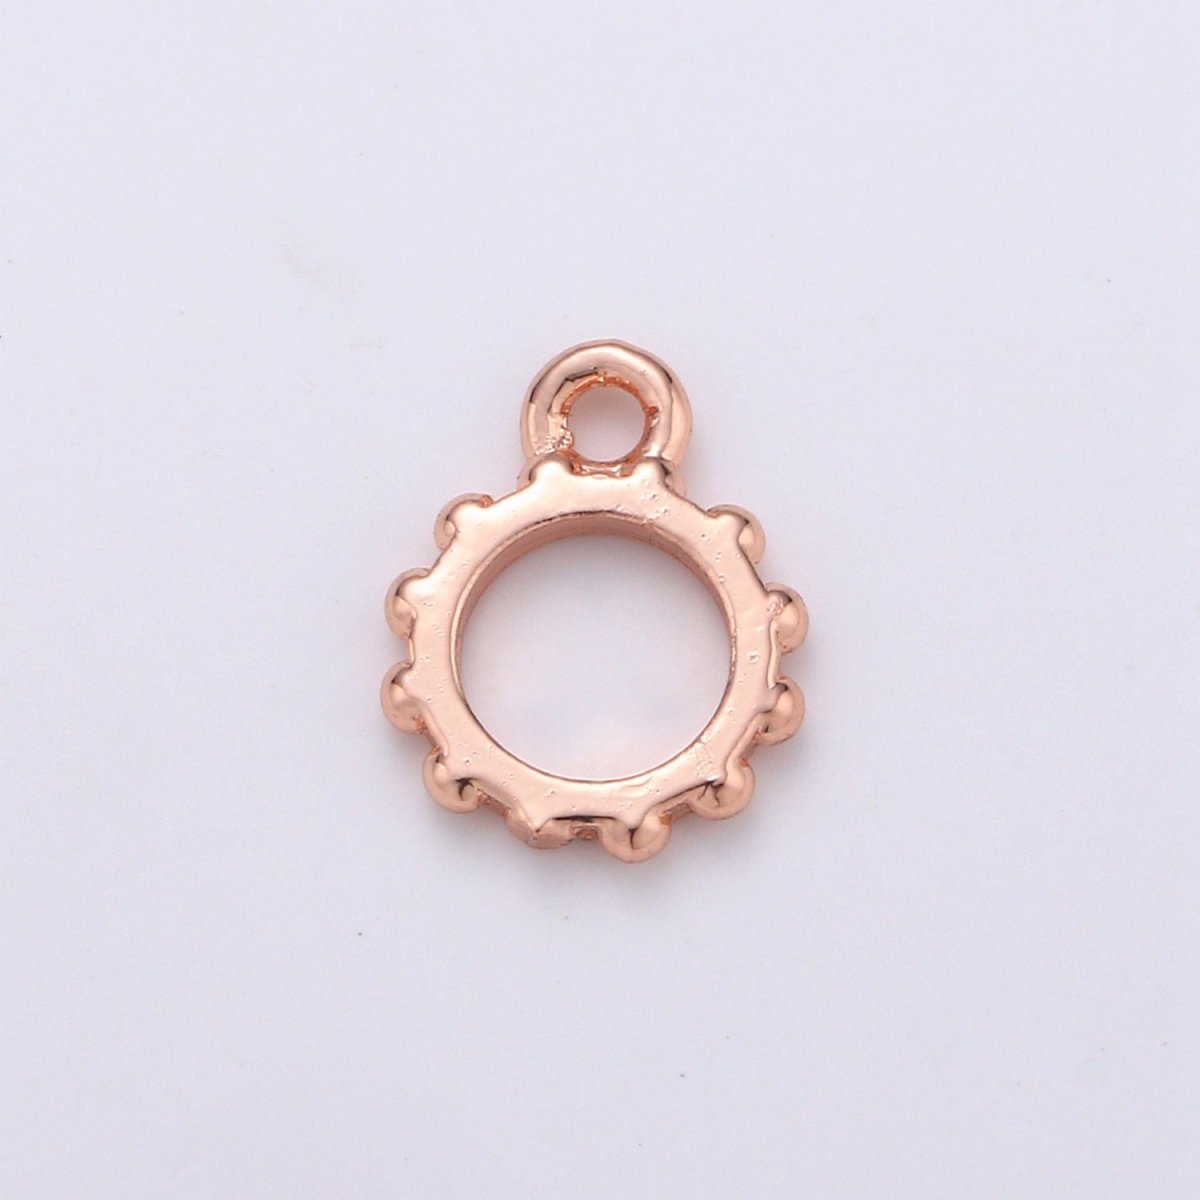 Round Gold Bail, Silver bail, Lead Nickel free, Pendant bail Rose Gold bail for charm Necklace making supplies, Jewelry supplies K-192 - K-195 - DLUXCA